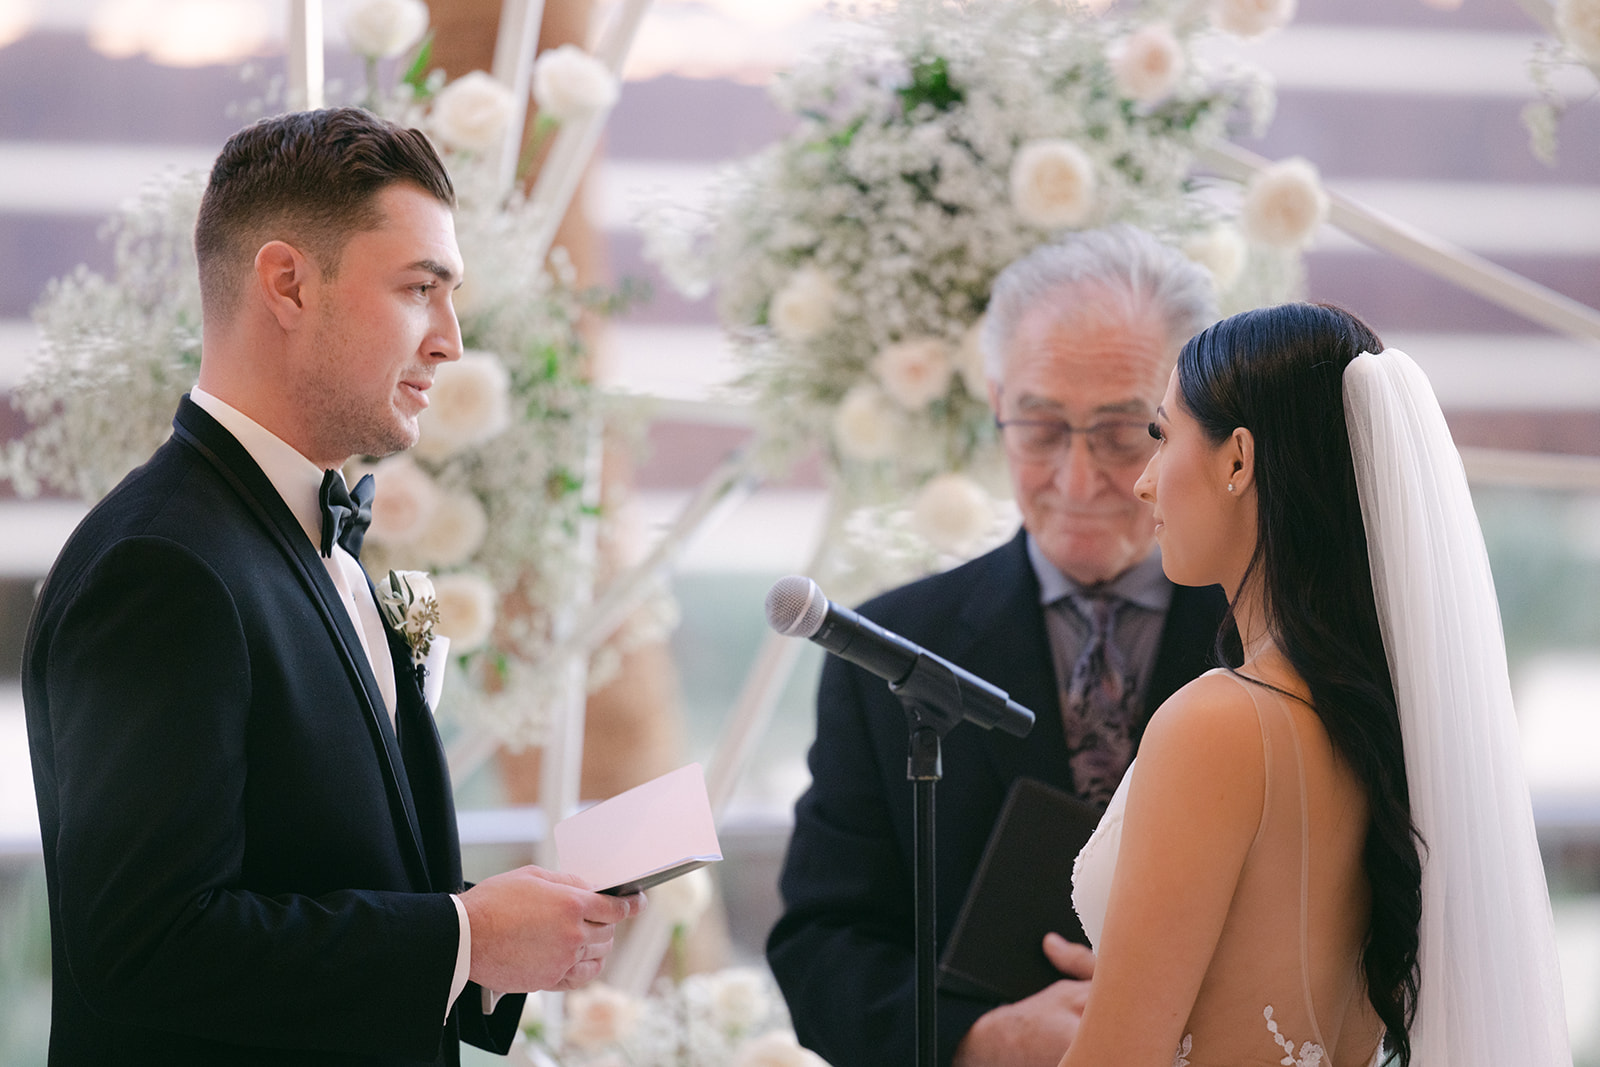 Groom giving personal vows during ceremony 